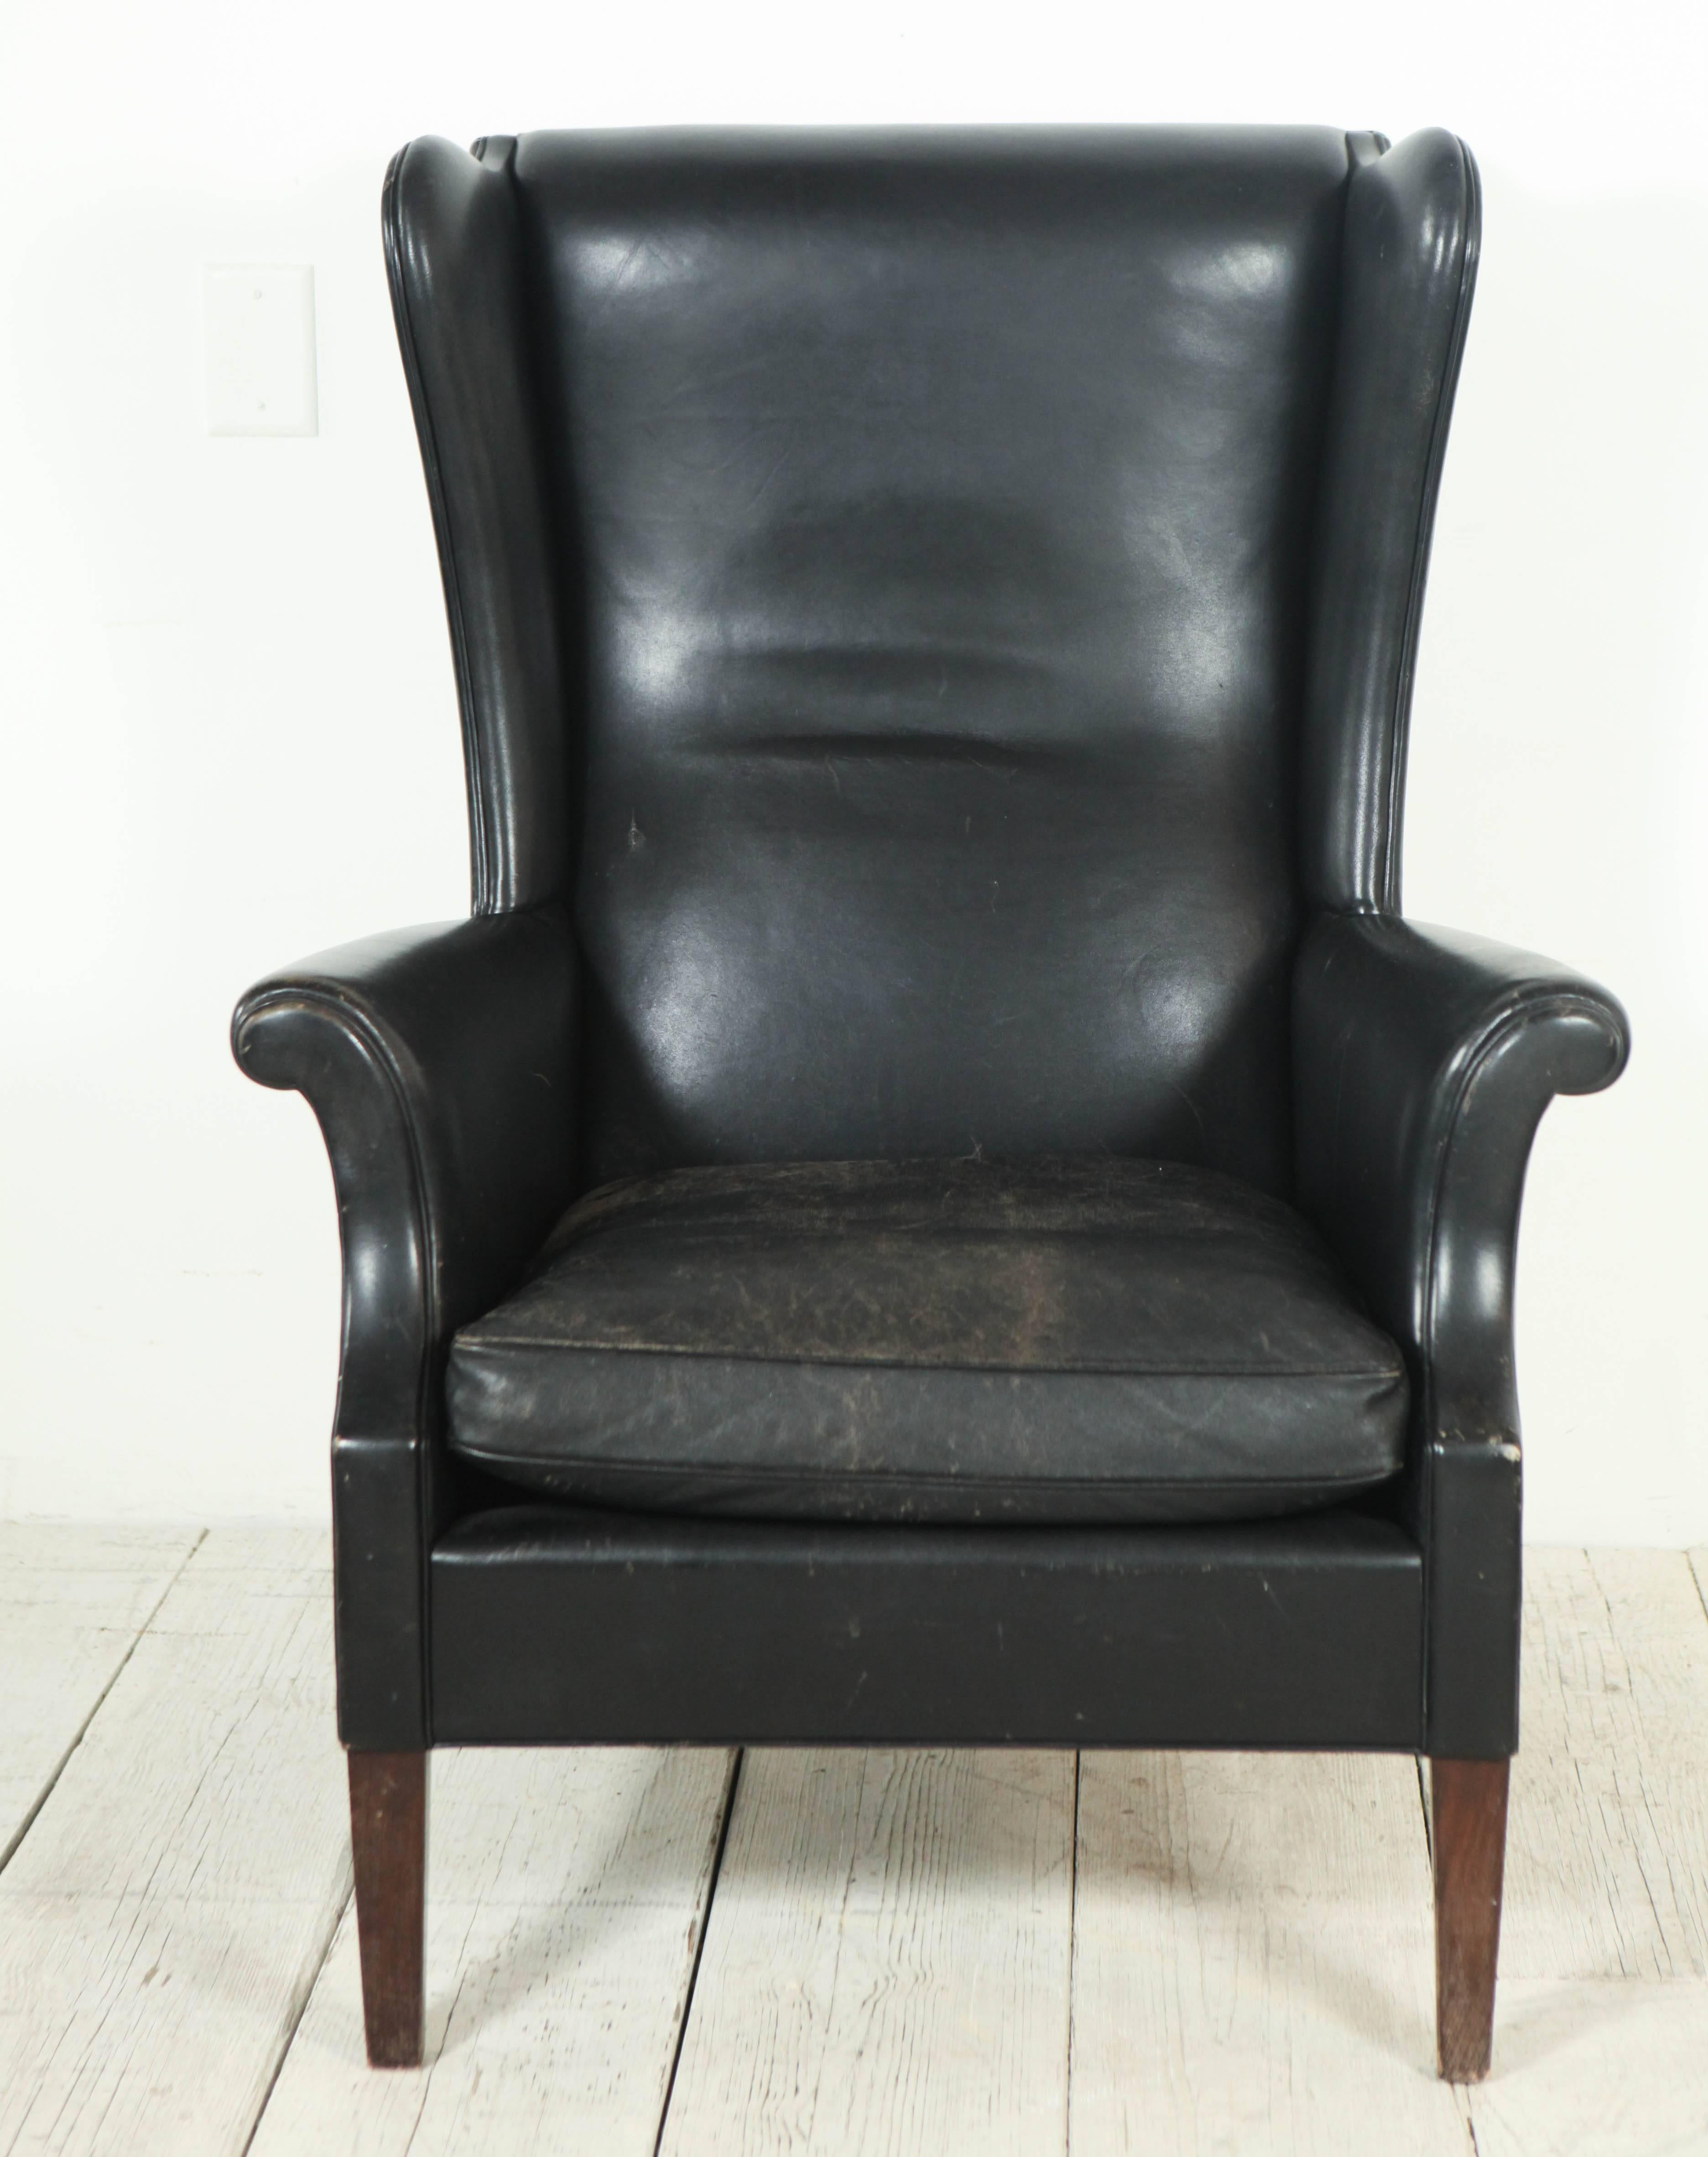 Beautiful tall wingback lounge chair with scrolled arms.